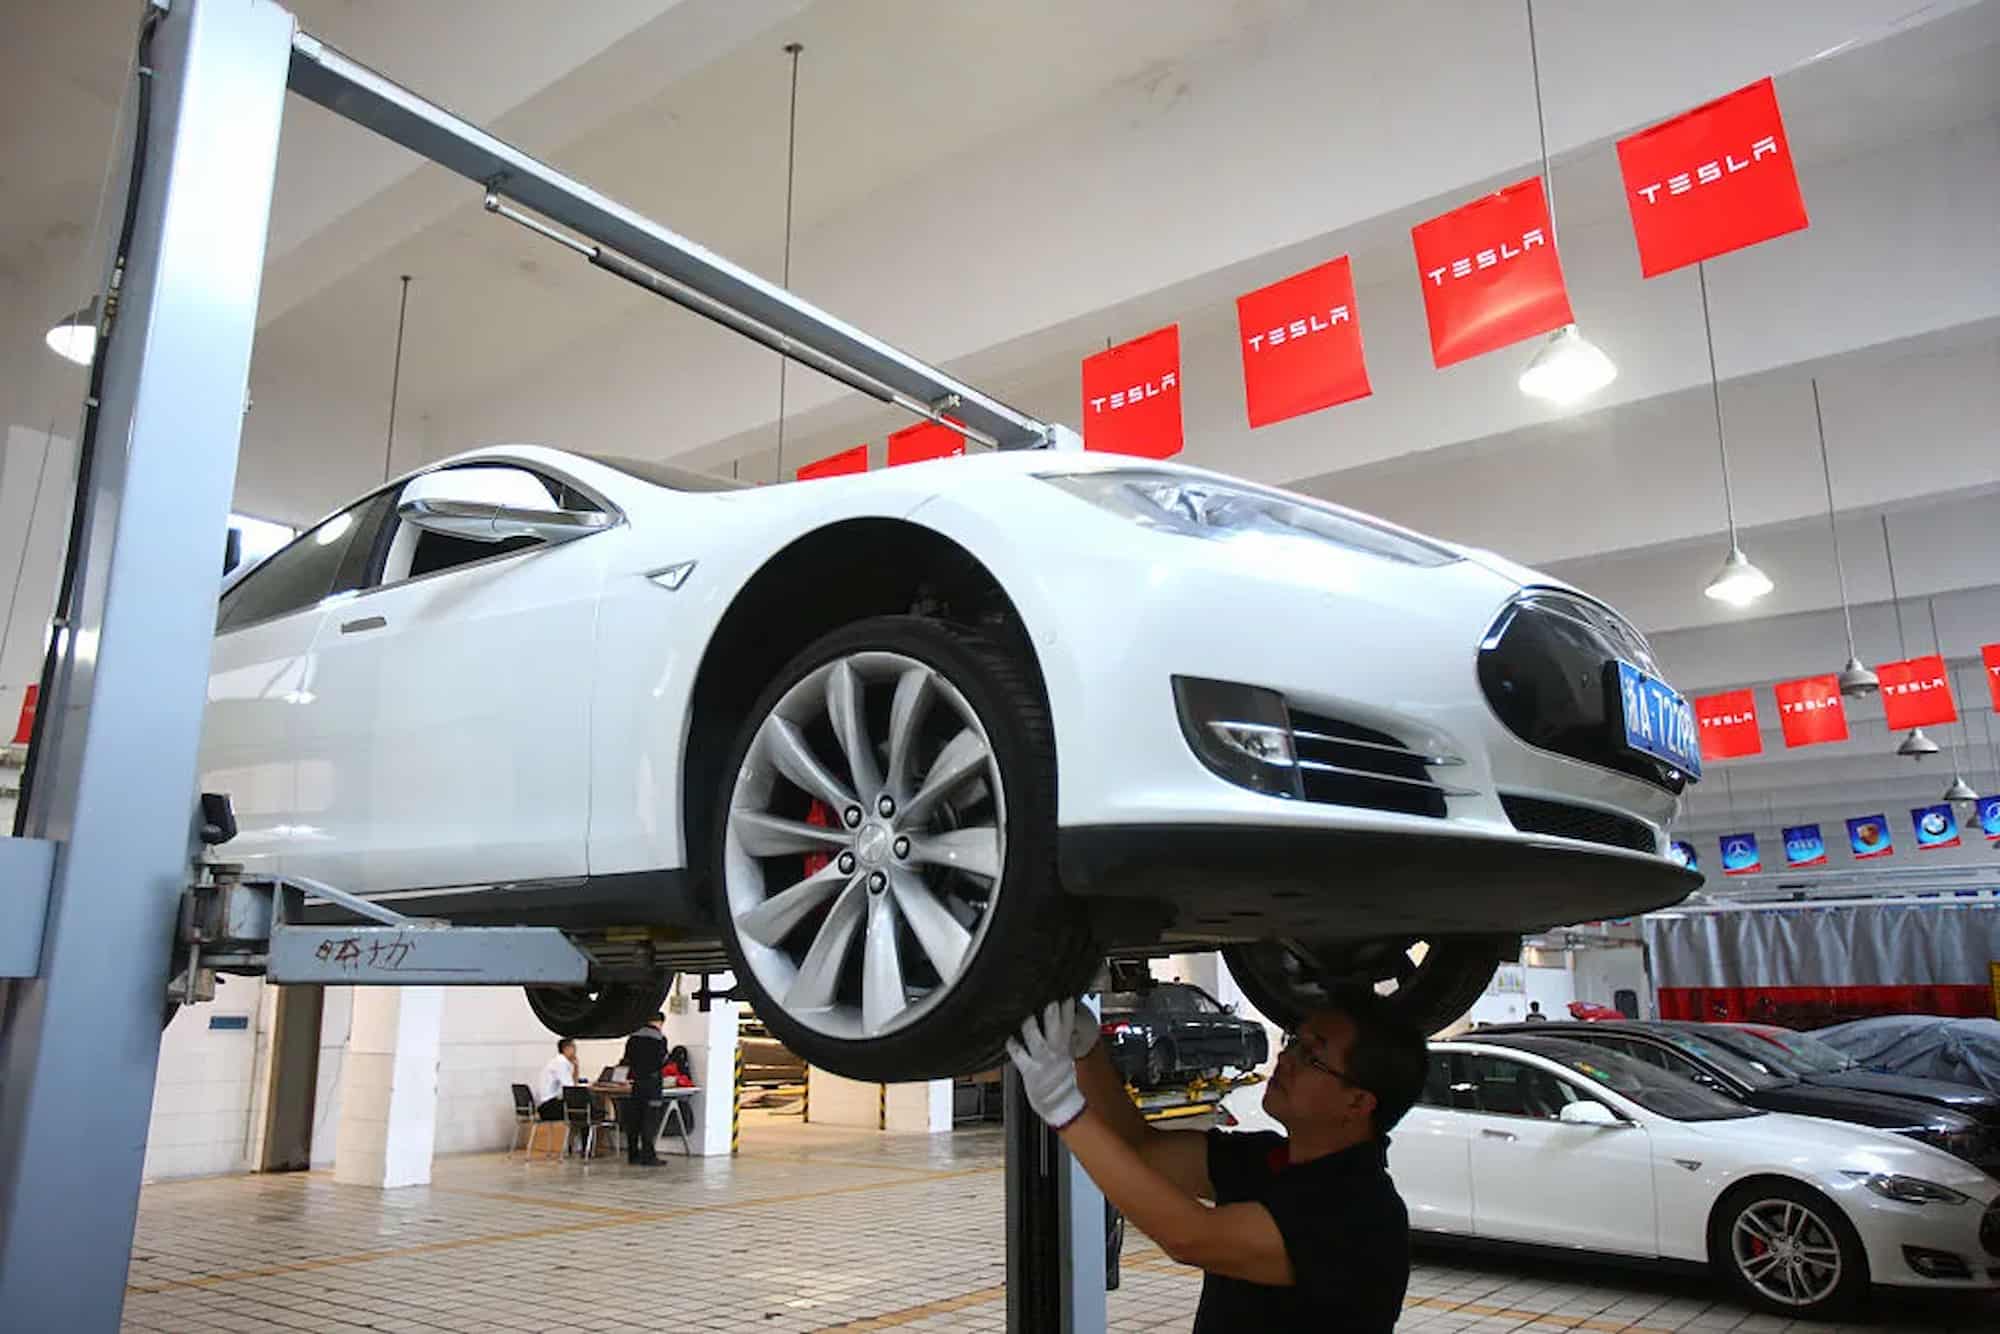 maintenance technician examines and repairs a Tesla vehicle